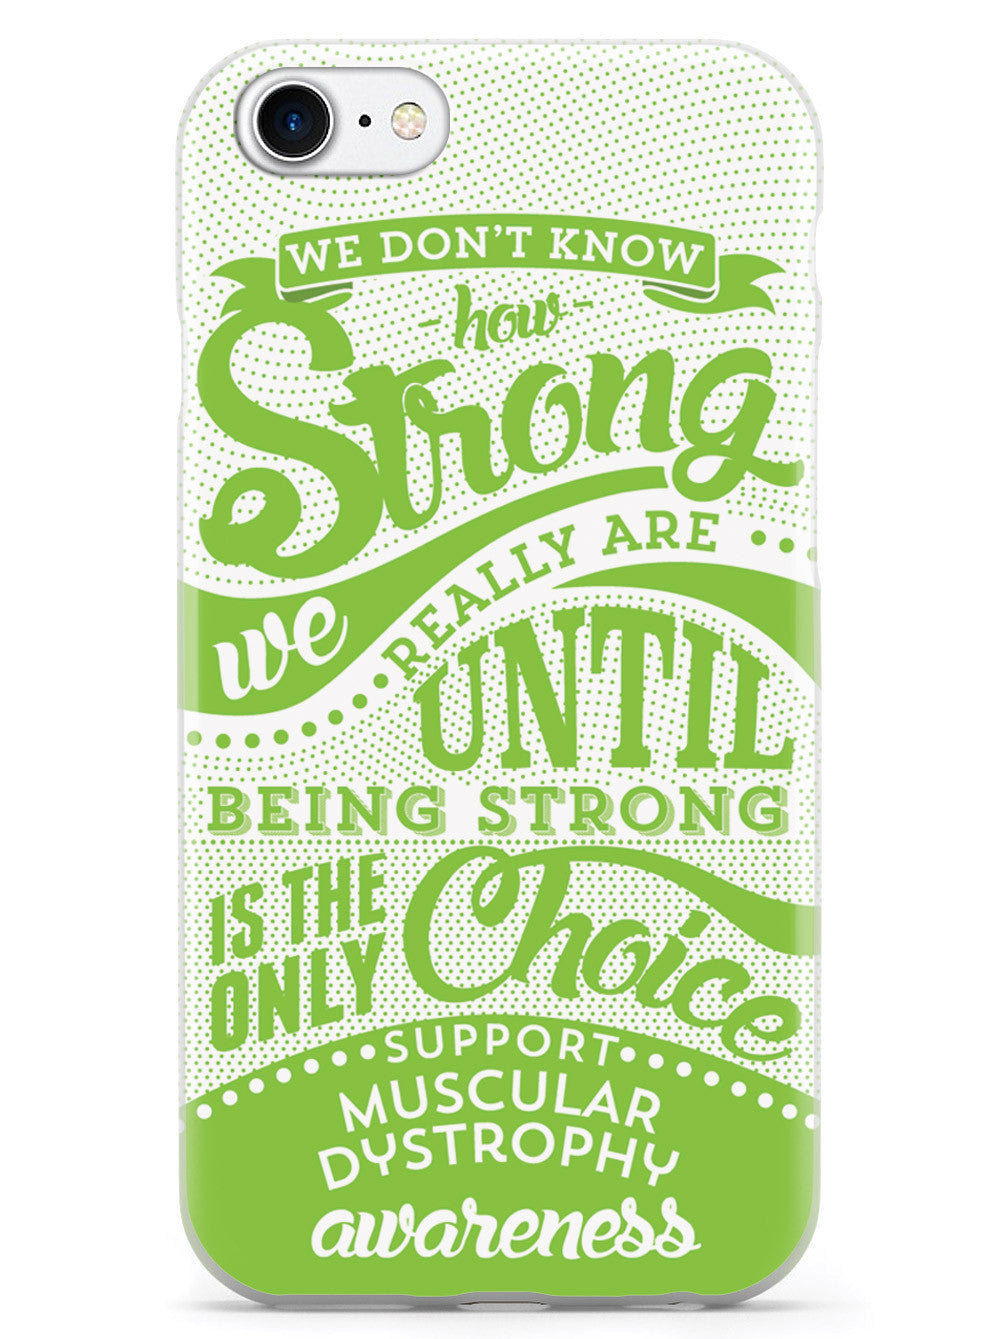 How Strong - Muscular Dystrophy Awareness Case